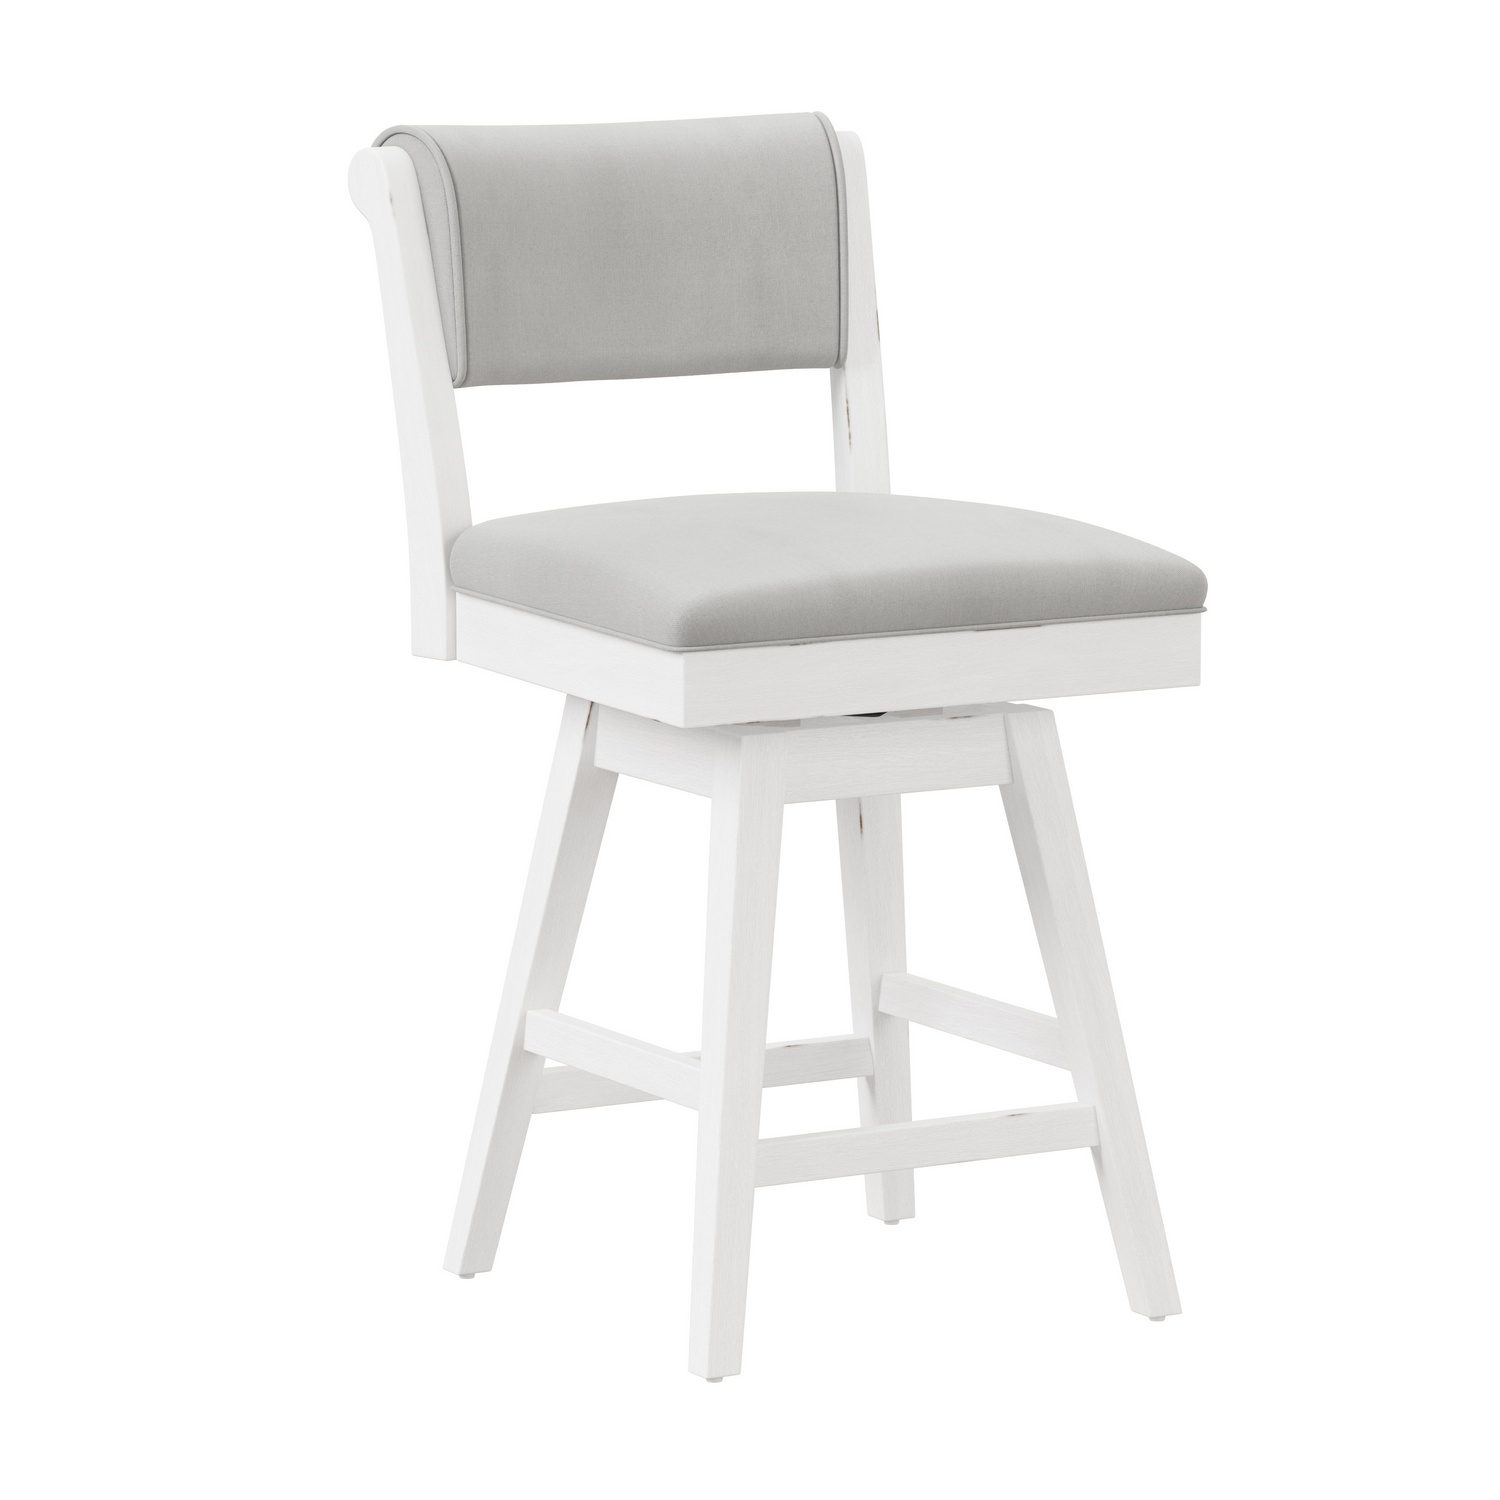 Hillsdale Clarion Wood and Upholstered Counter Height Swivel Stool - Sea White